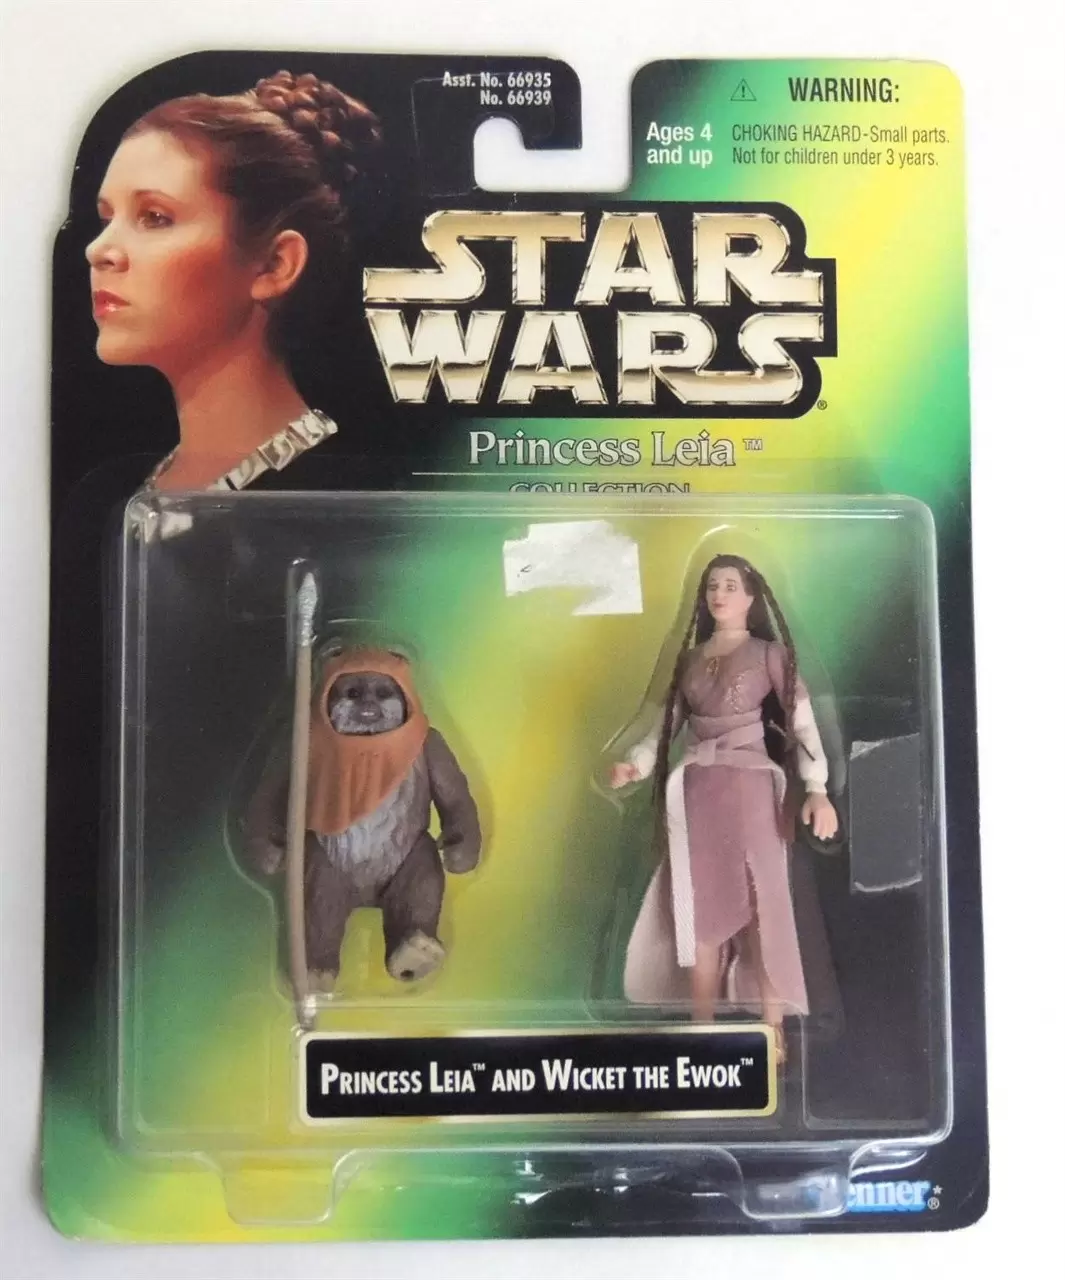 Power of the Force 2 - Princess Leia and Wicket the Ewok